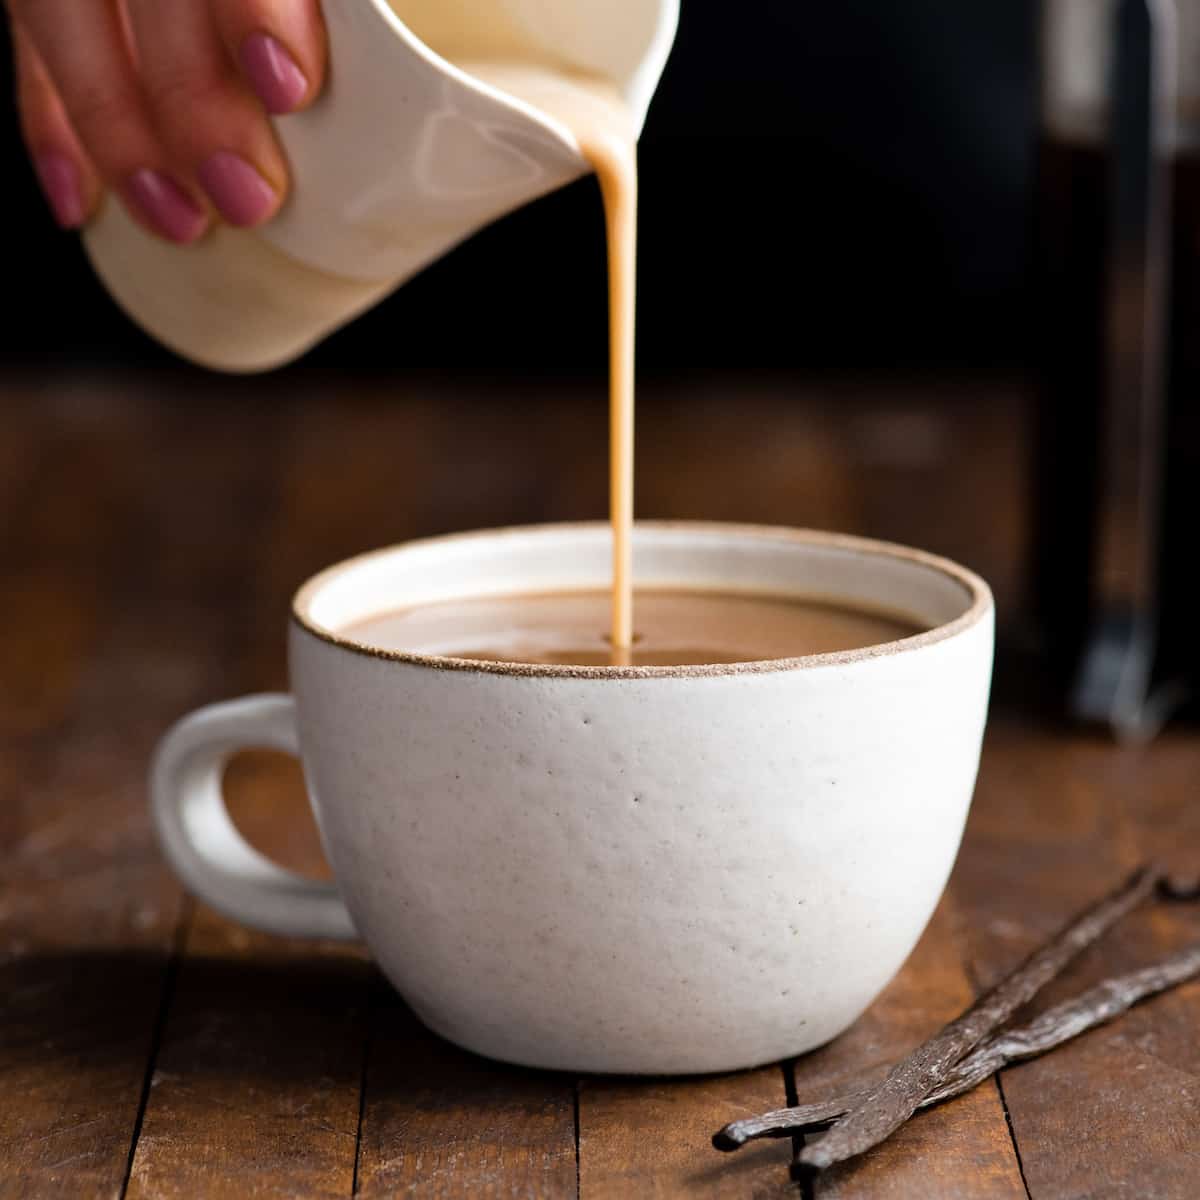 Front view of healthy coffee creamer being poured into a mug of coffee